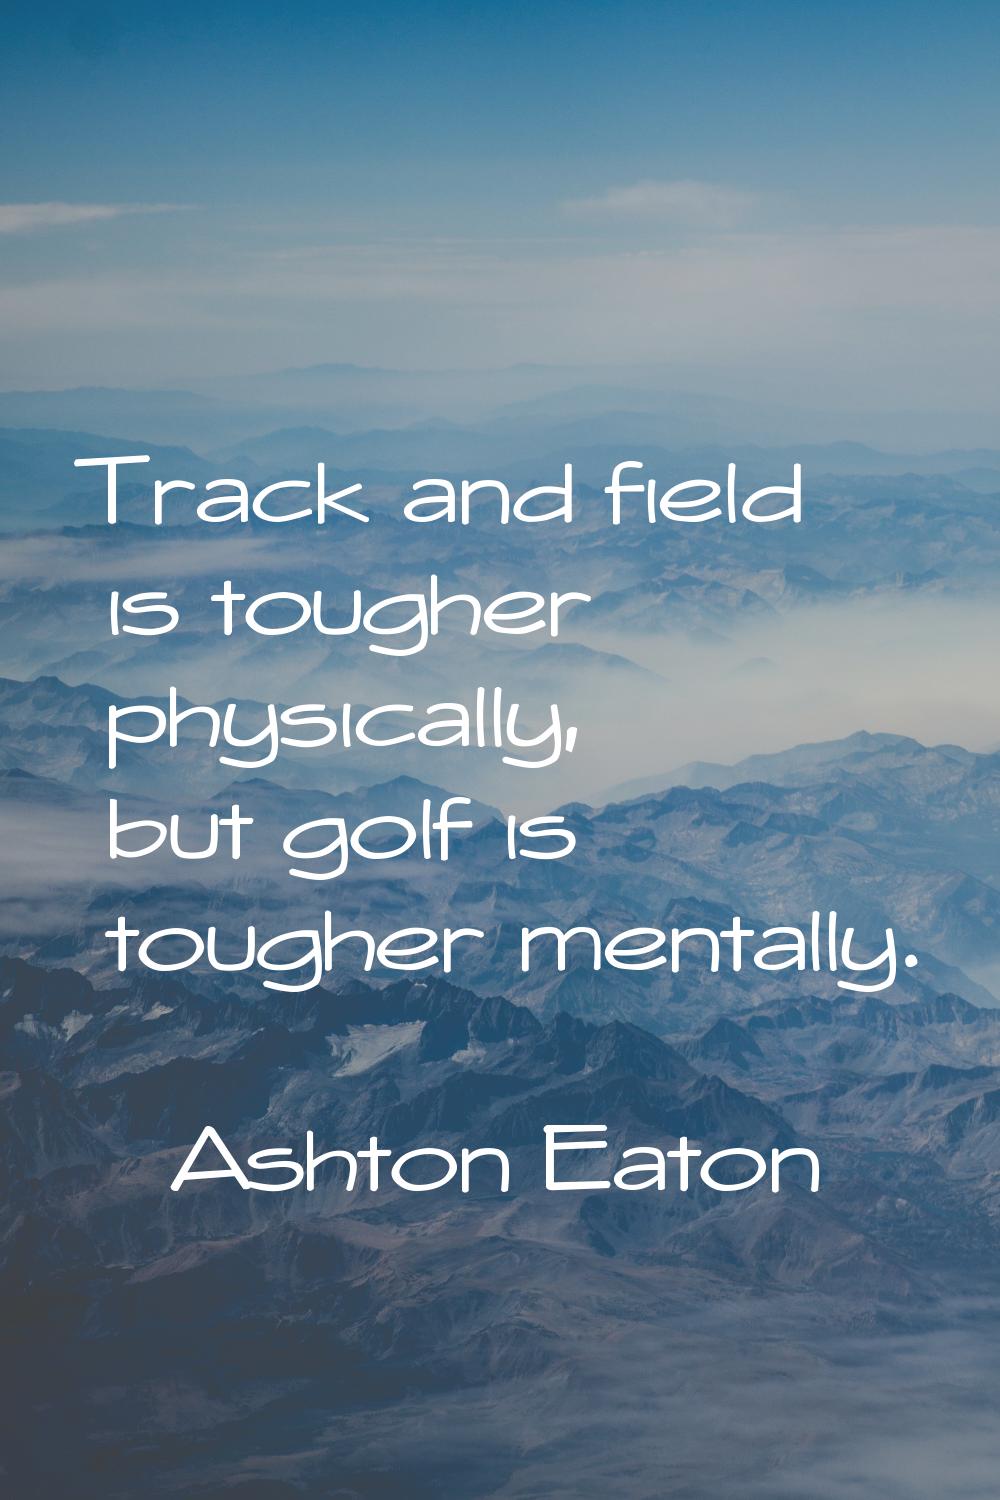 Track and field is tougher physically, but golf is tougher mentally.